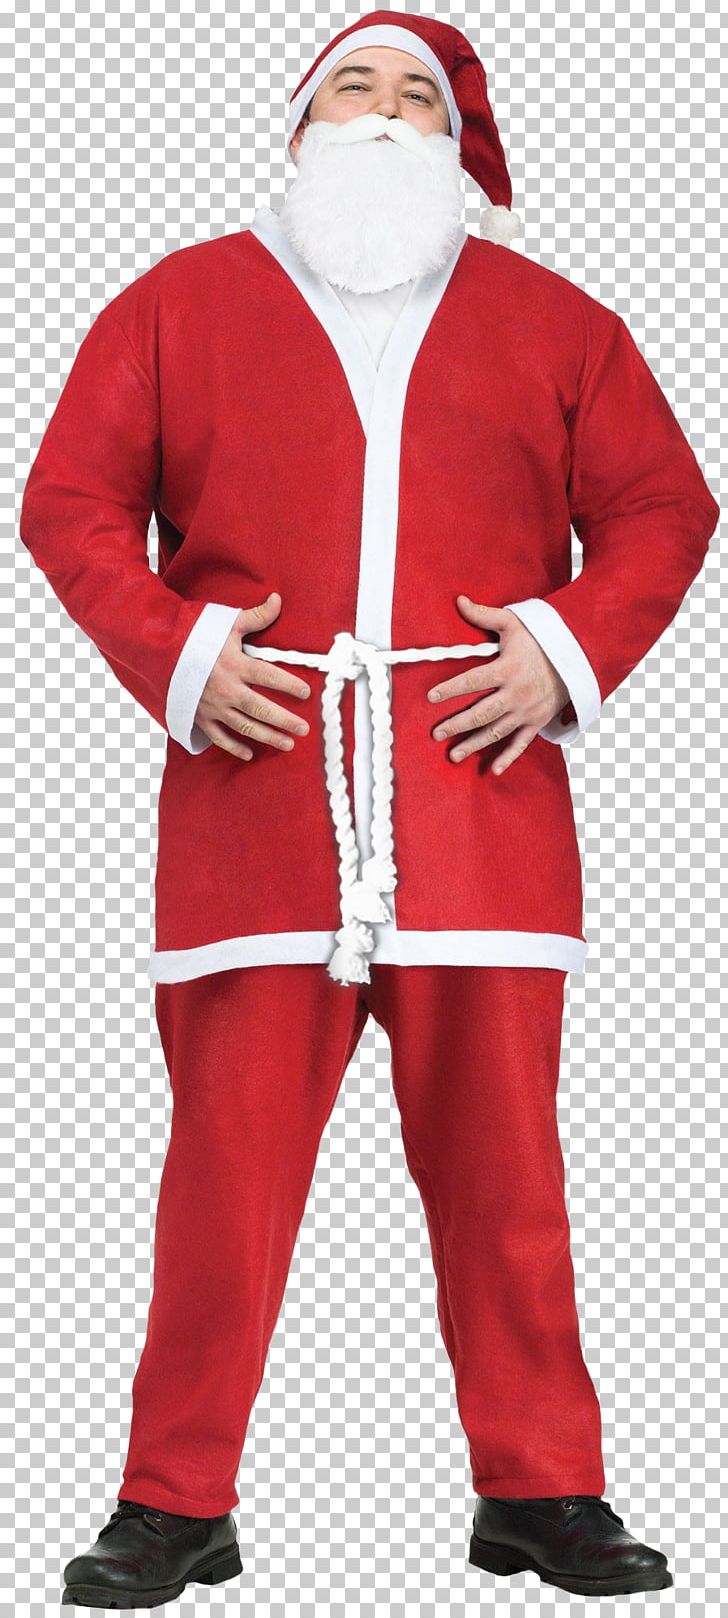 Santa Claus Costume Santa Suit Clothing PNG, Clipart, Christmas, Clothing, Clothing Sizes, Costume, Costume Party Free PNG Download